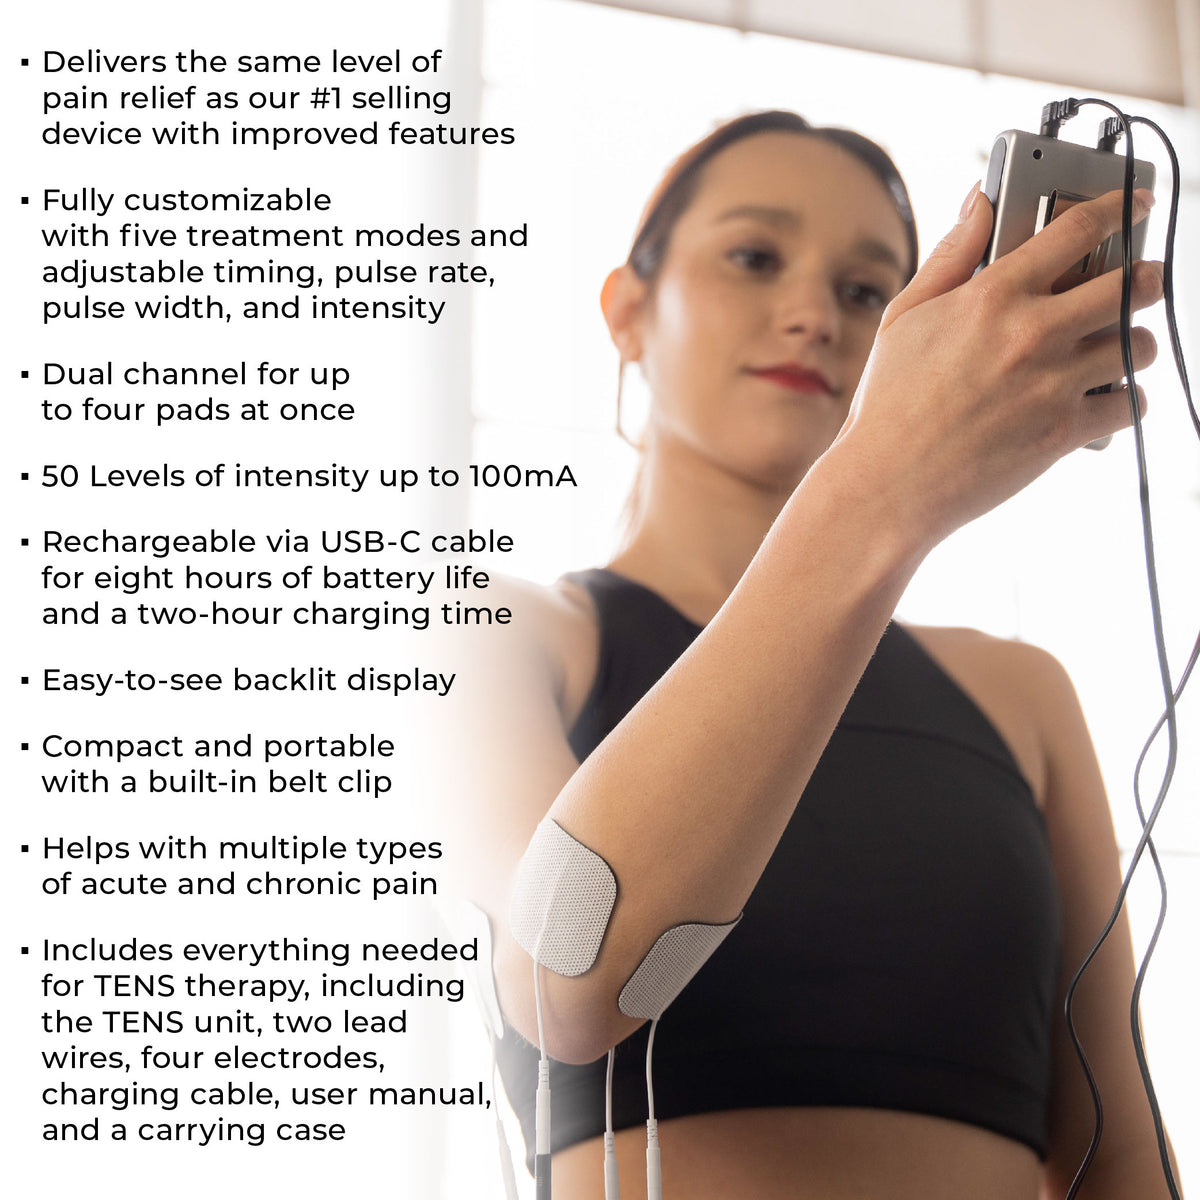 Tens 7000 Rechargeable Tens Unit Muscle Stimulator and Pain Relief Device - Advanced Tens Machine for Effective Back Pain Relief, Nerve Pain Relief